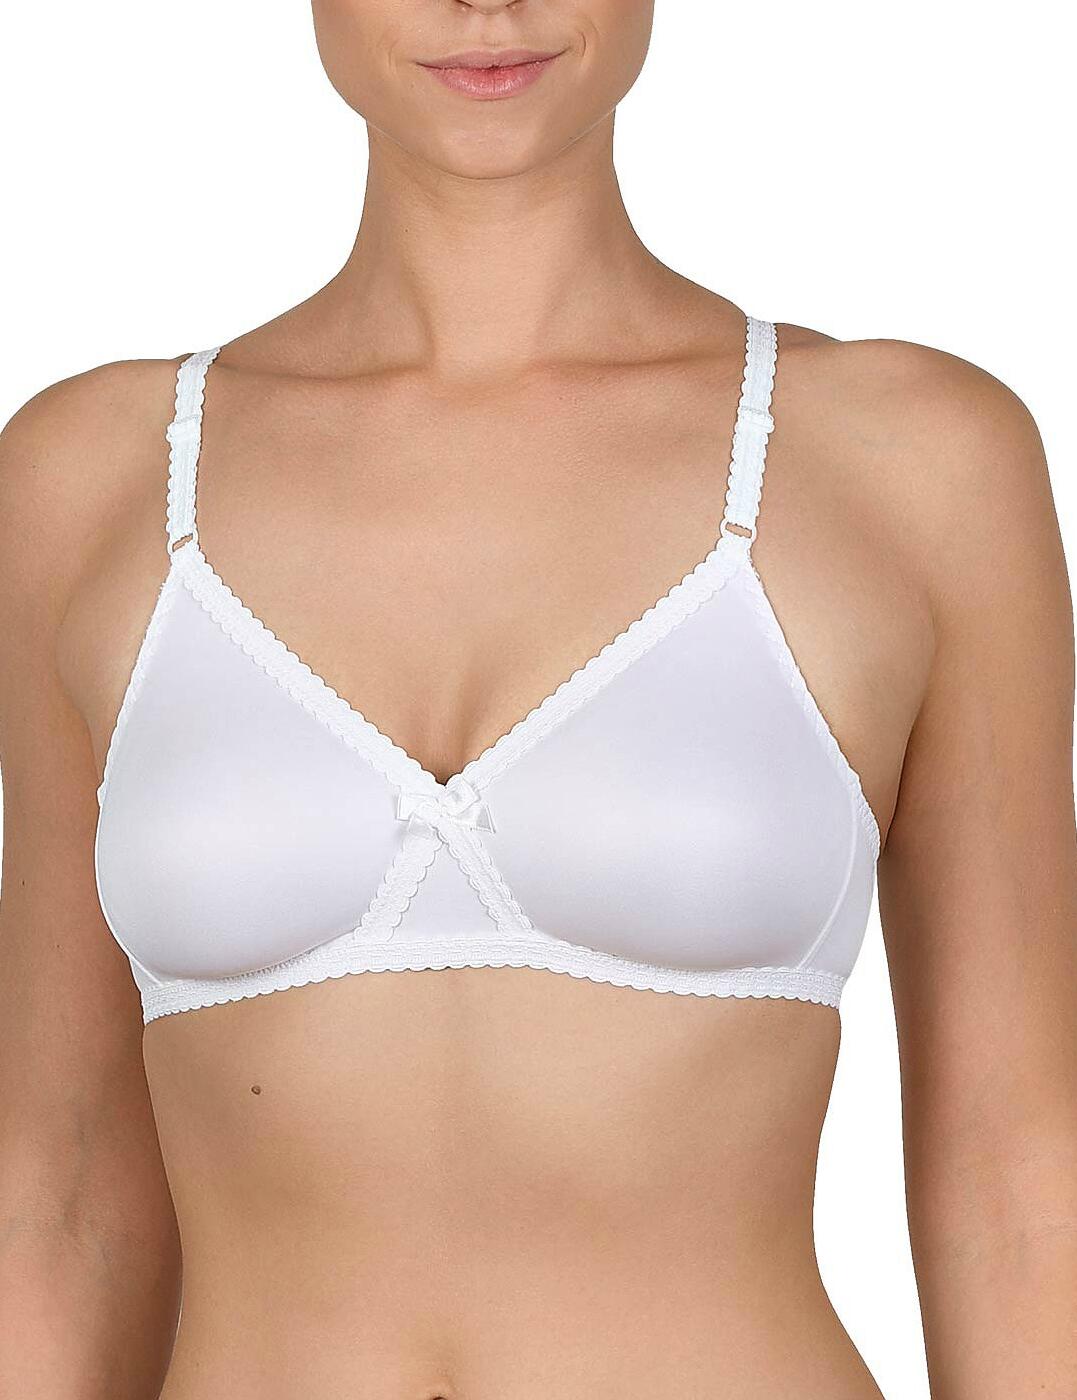 Naturana Moulded Soft Cup Bra White